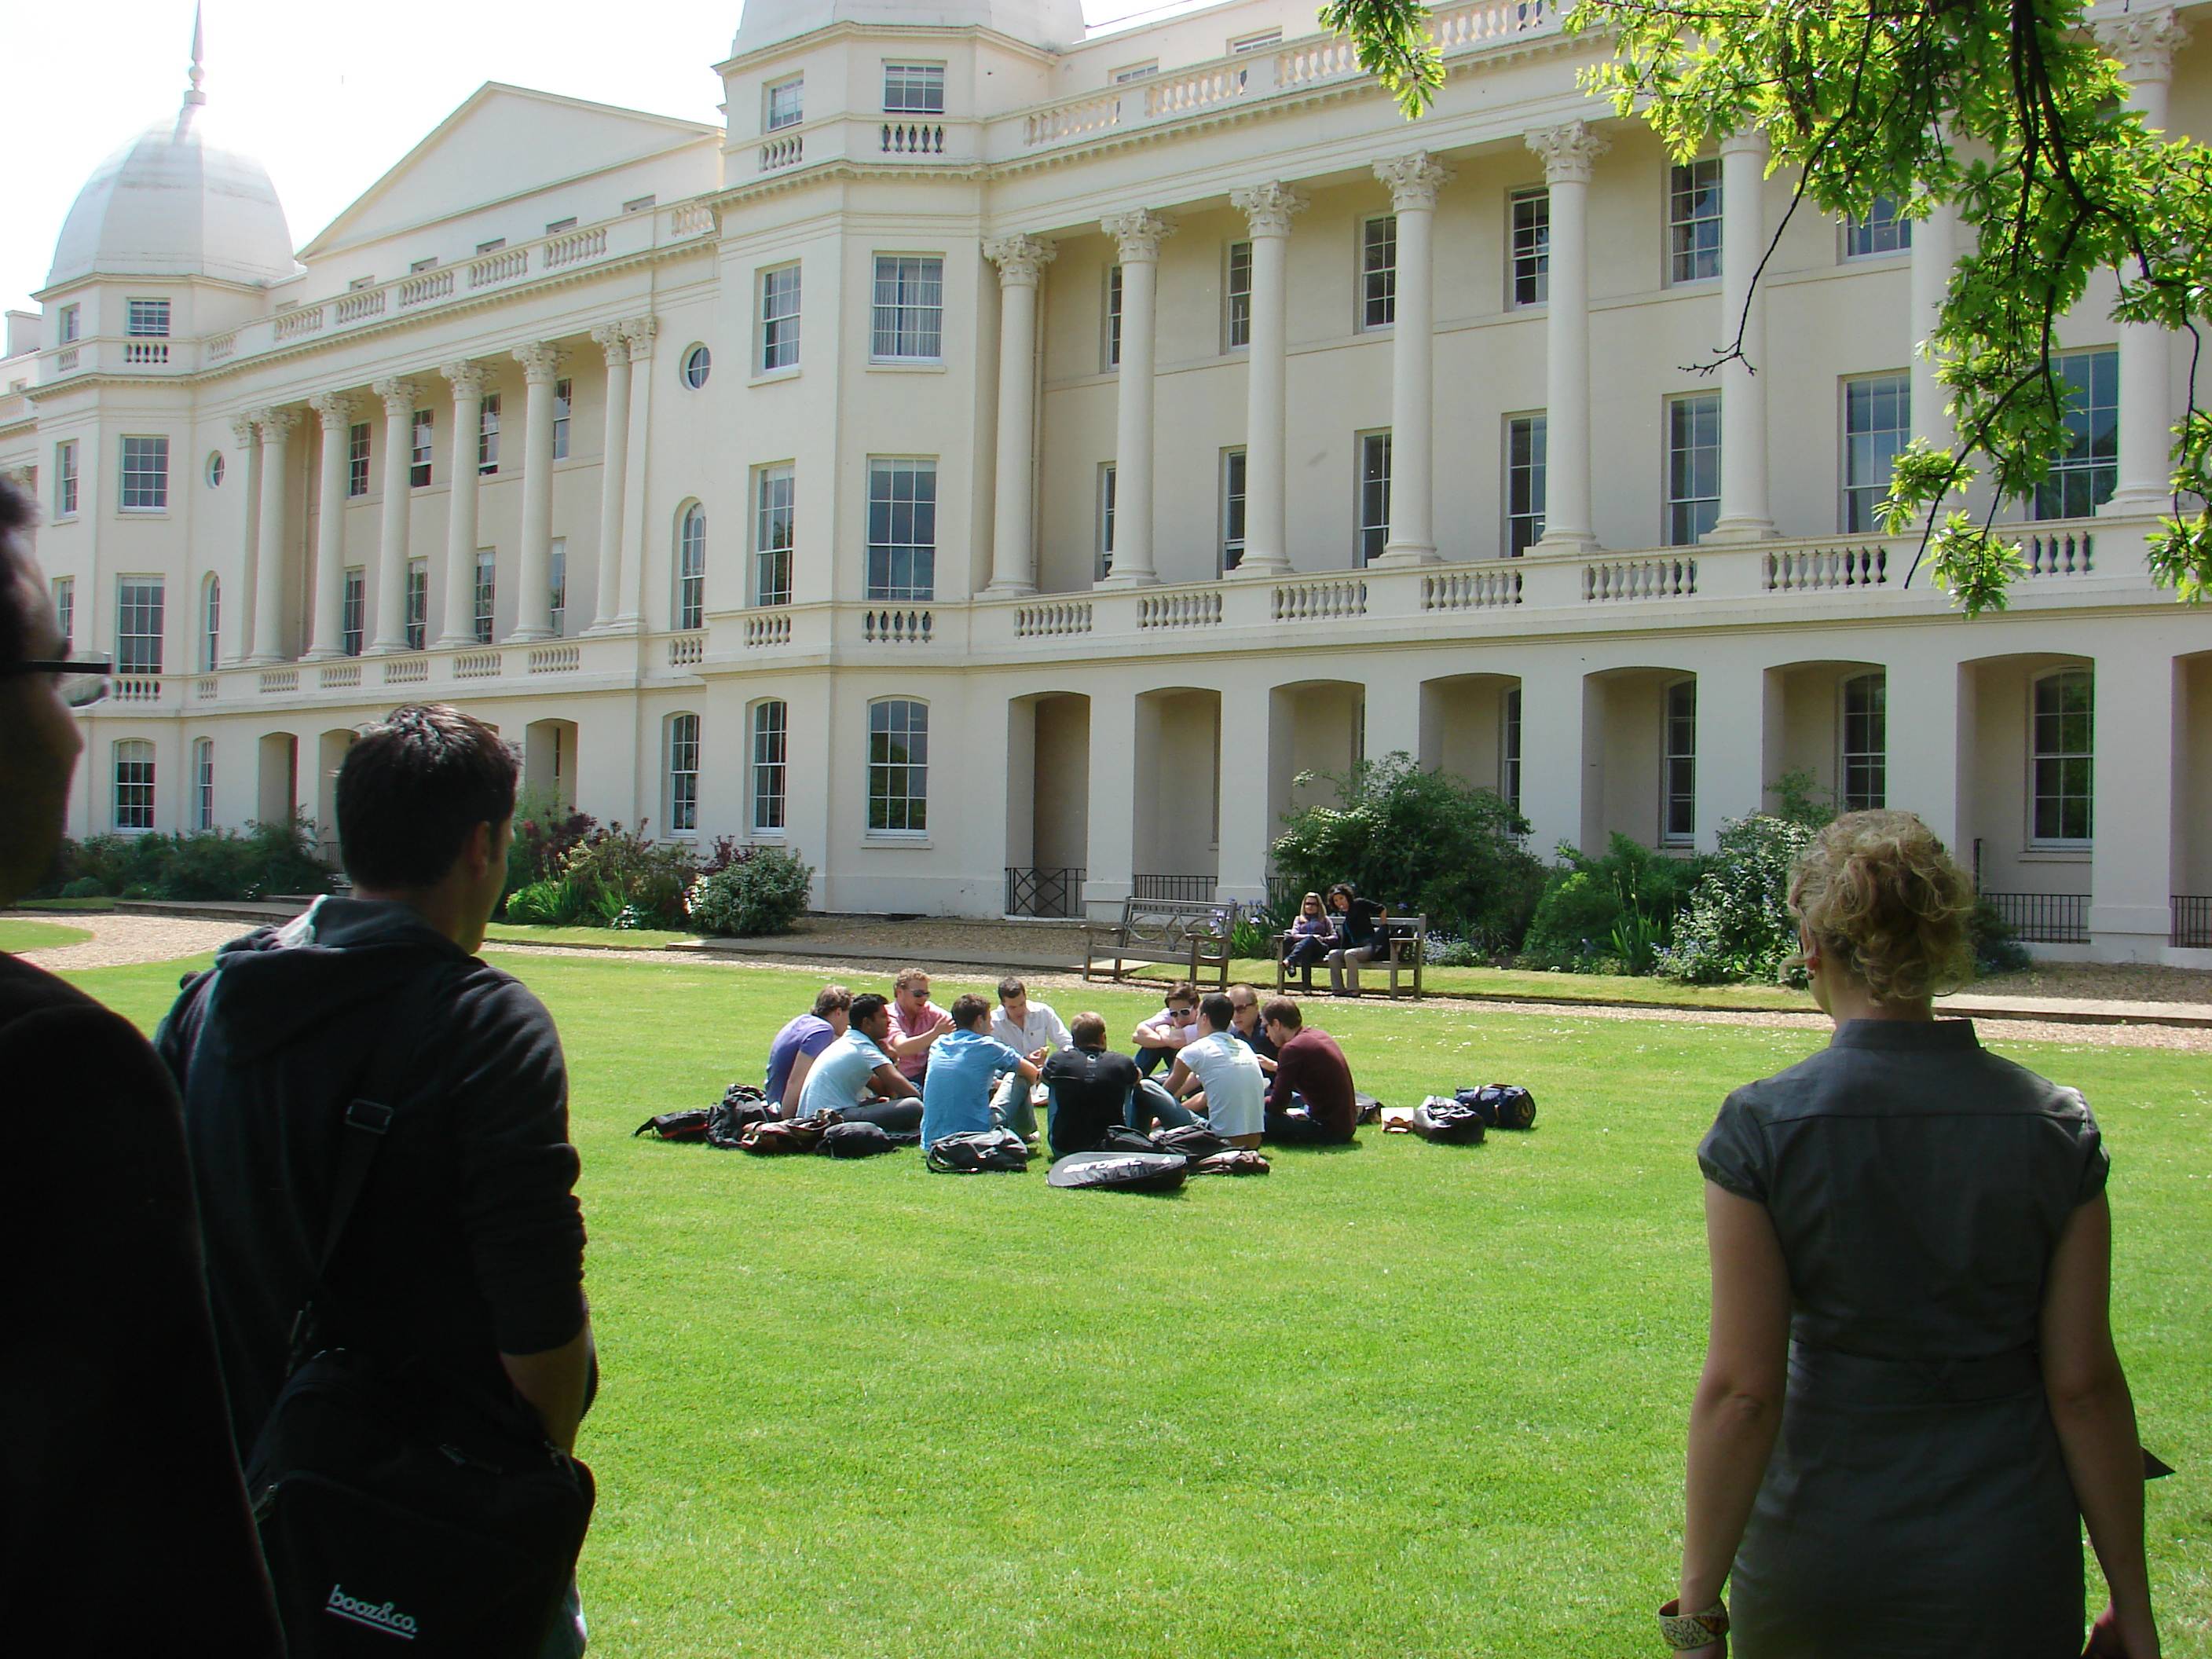 Permalink to: "No Brexit Impact On MBA Pay At London Business School"